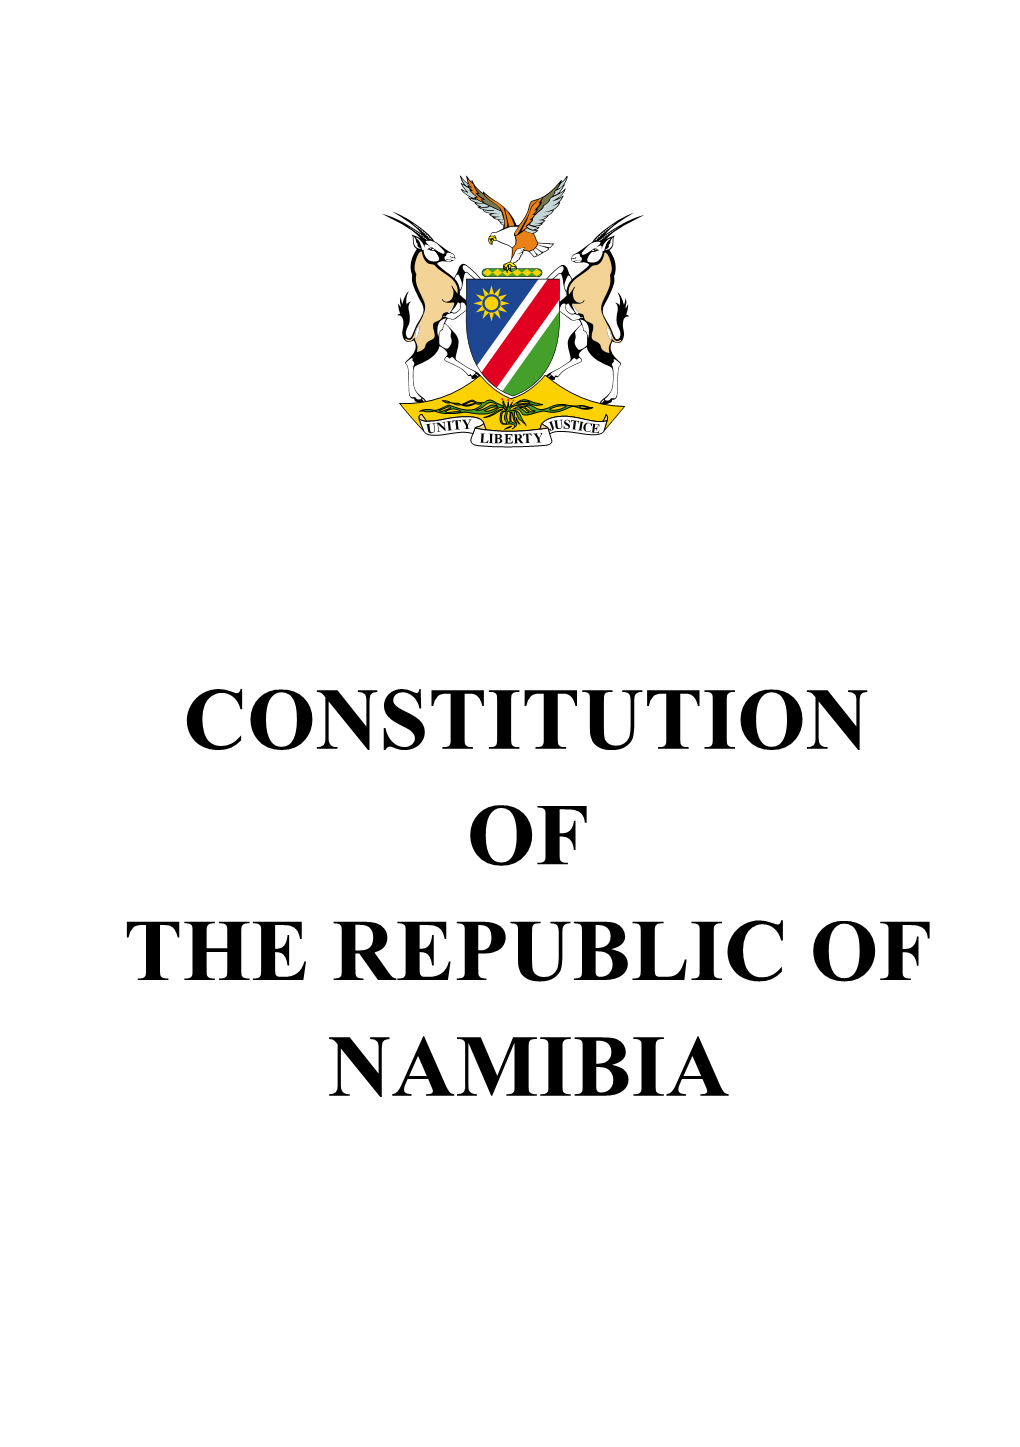 Constitution of the Republic of Namibia Isbnisbn 0-86976-523-X 0-86976-523-X